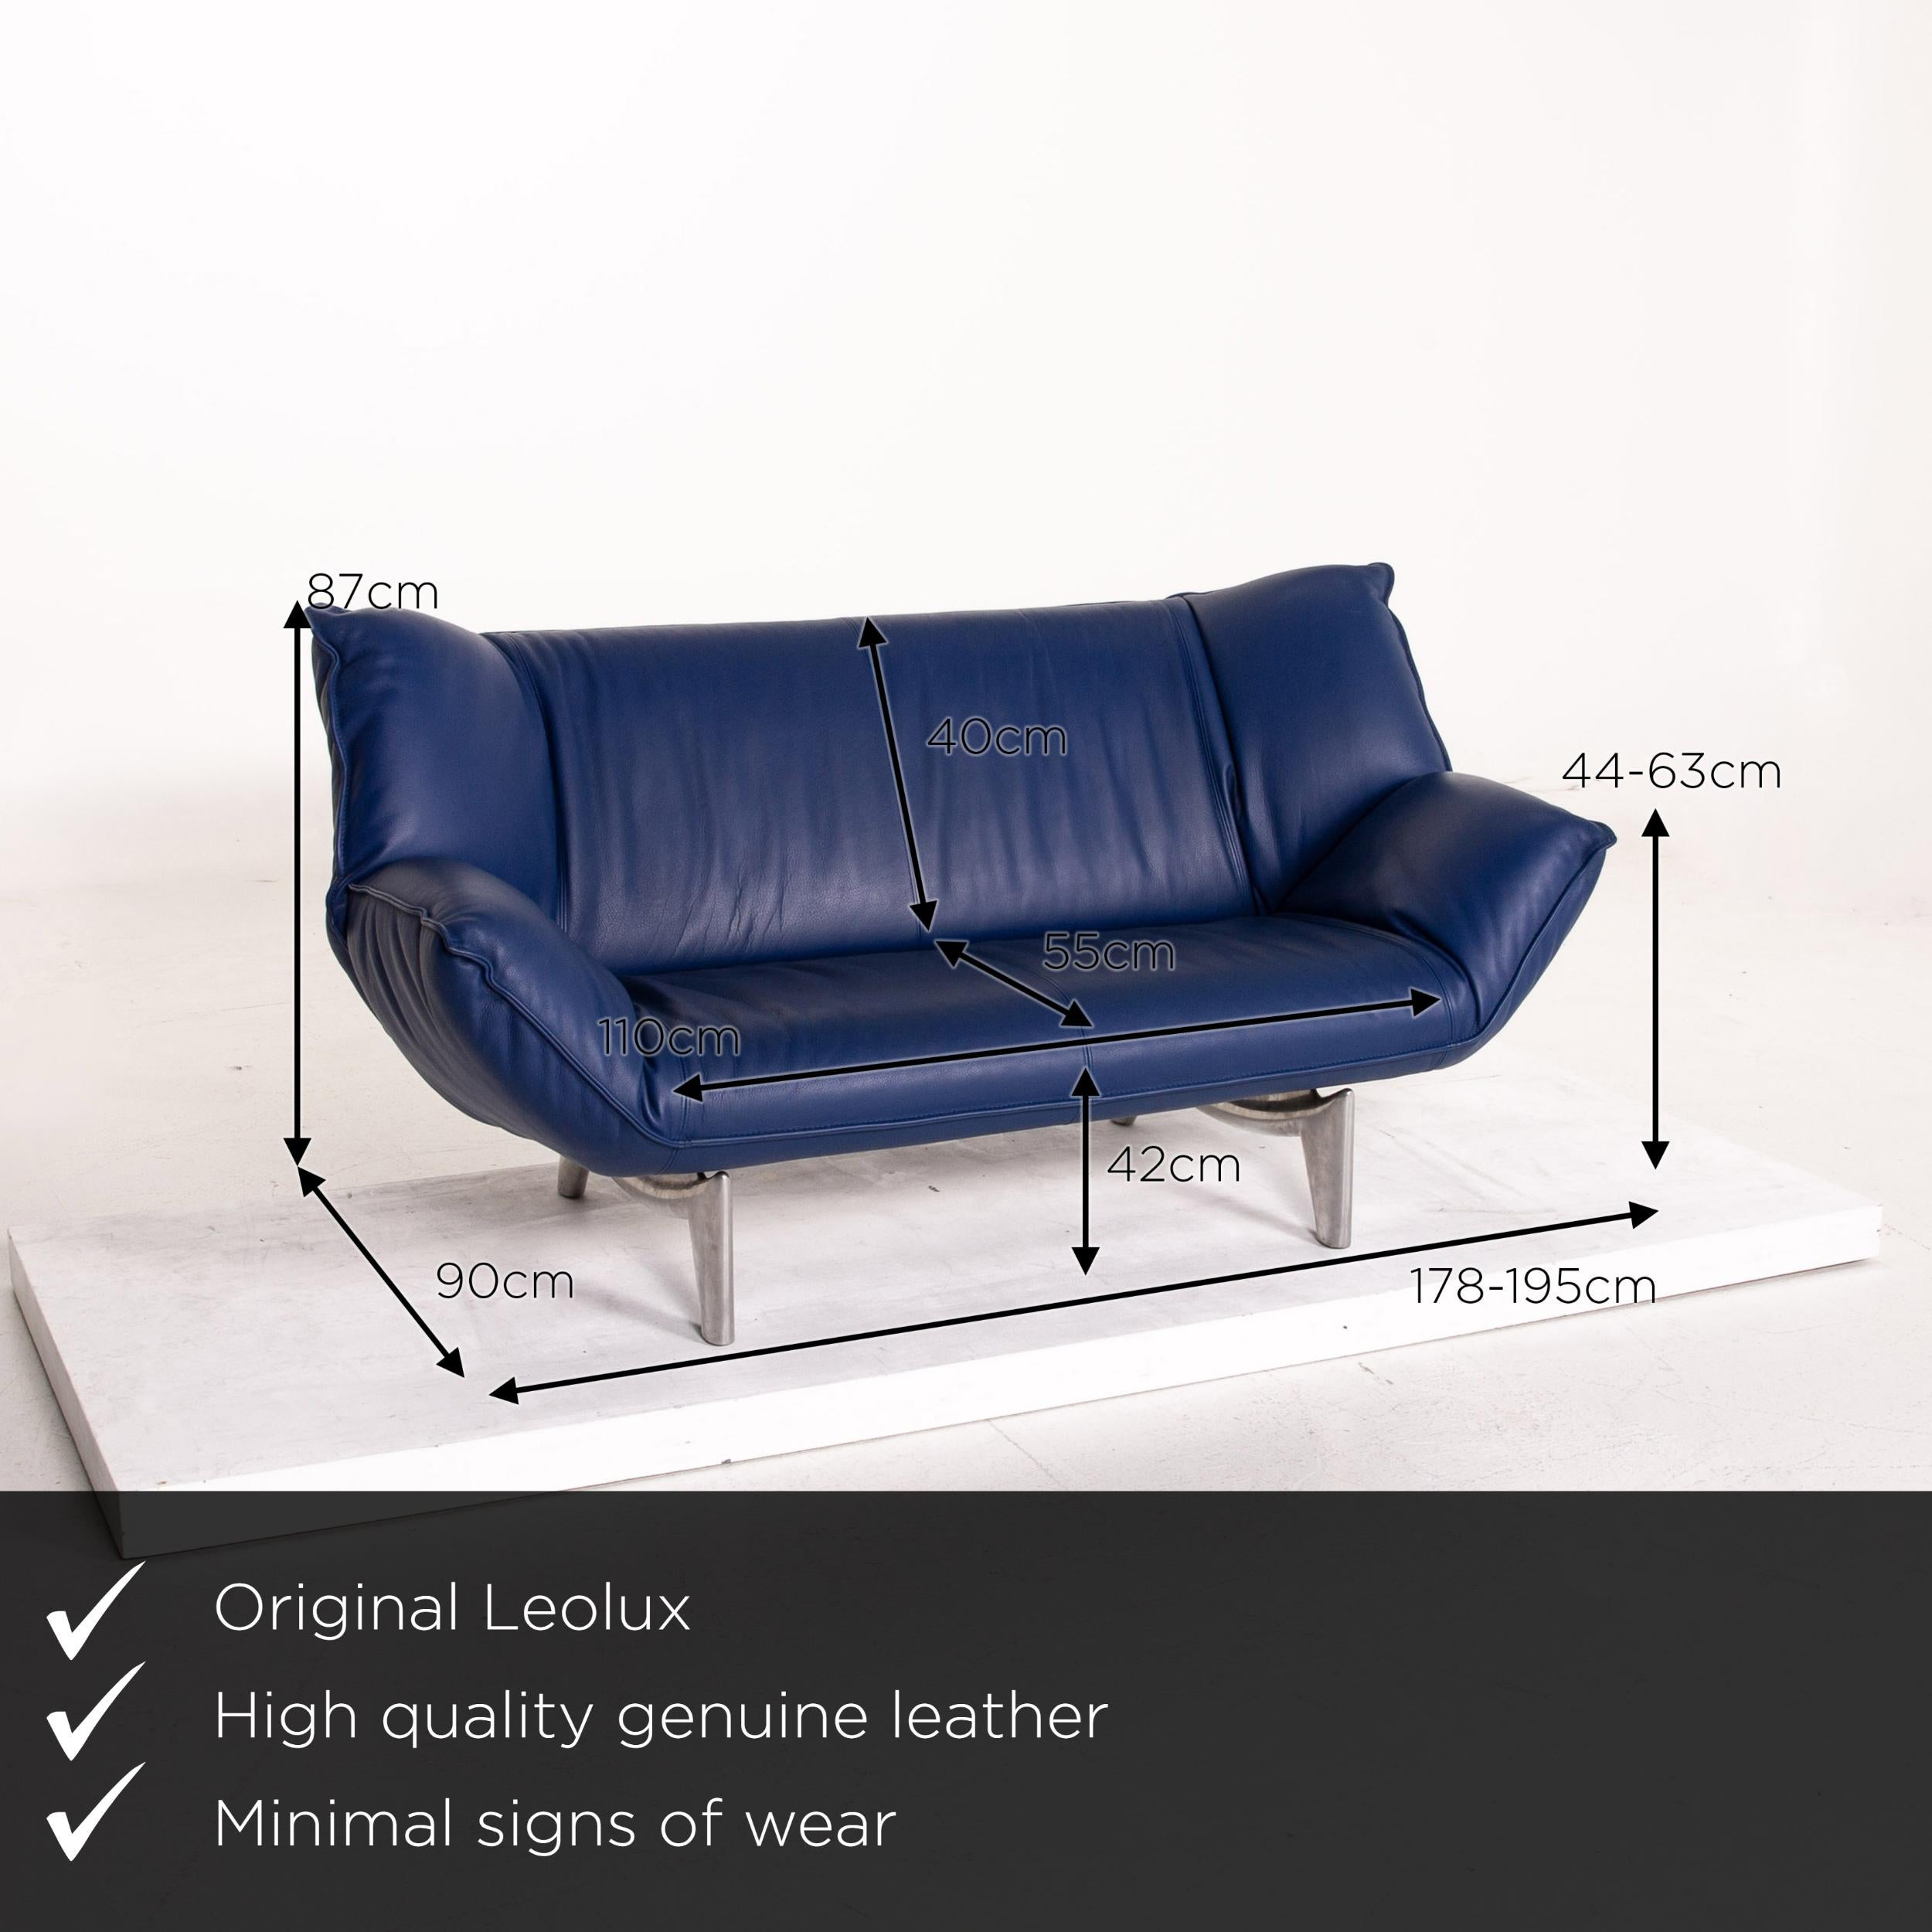 We present to you a Leolux Tango leather sofa blue dark blue two-seat function couch.
 

 Product measurements in centimeters:
 

Depth 90
Width 178
Height 87
Seat height 42
Rest height 44
Seat depth 55
Seat width 110
Back height 40.
  